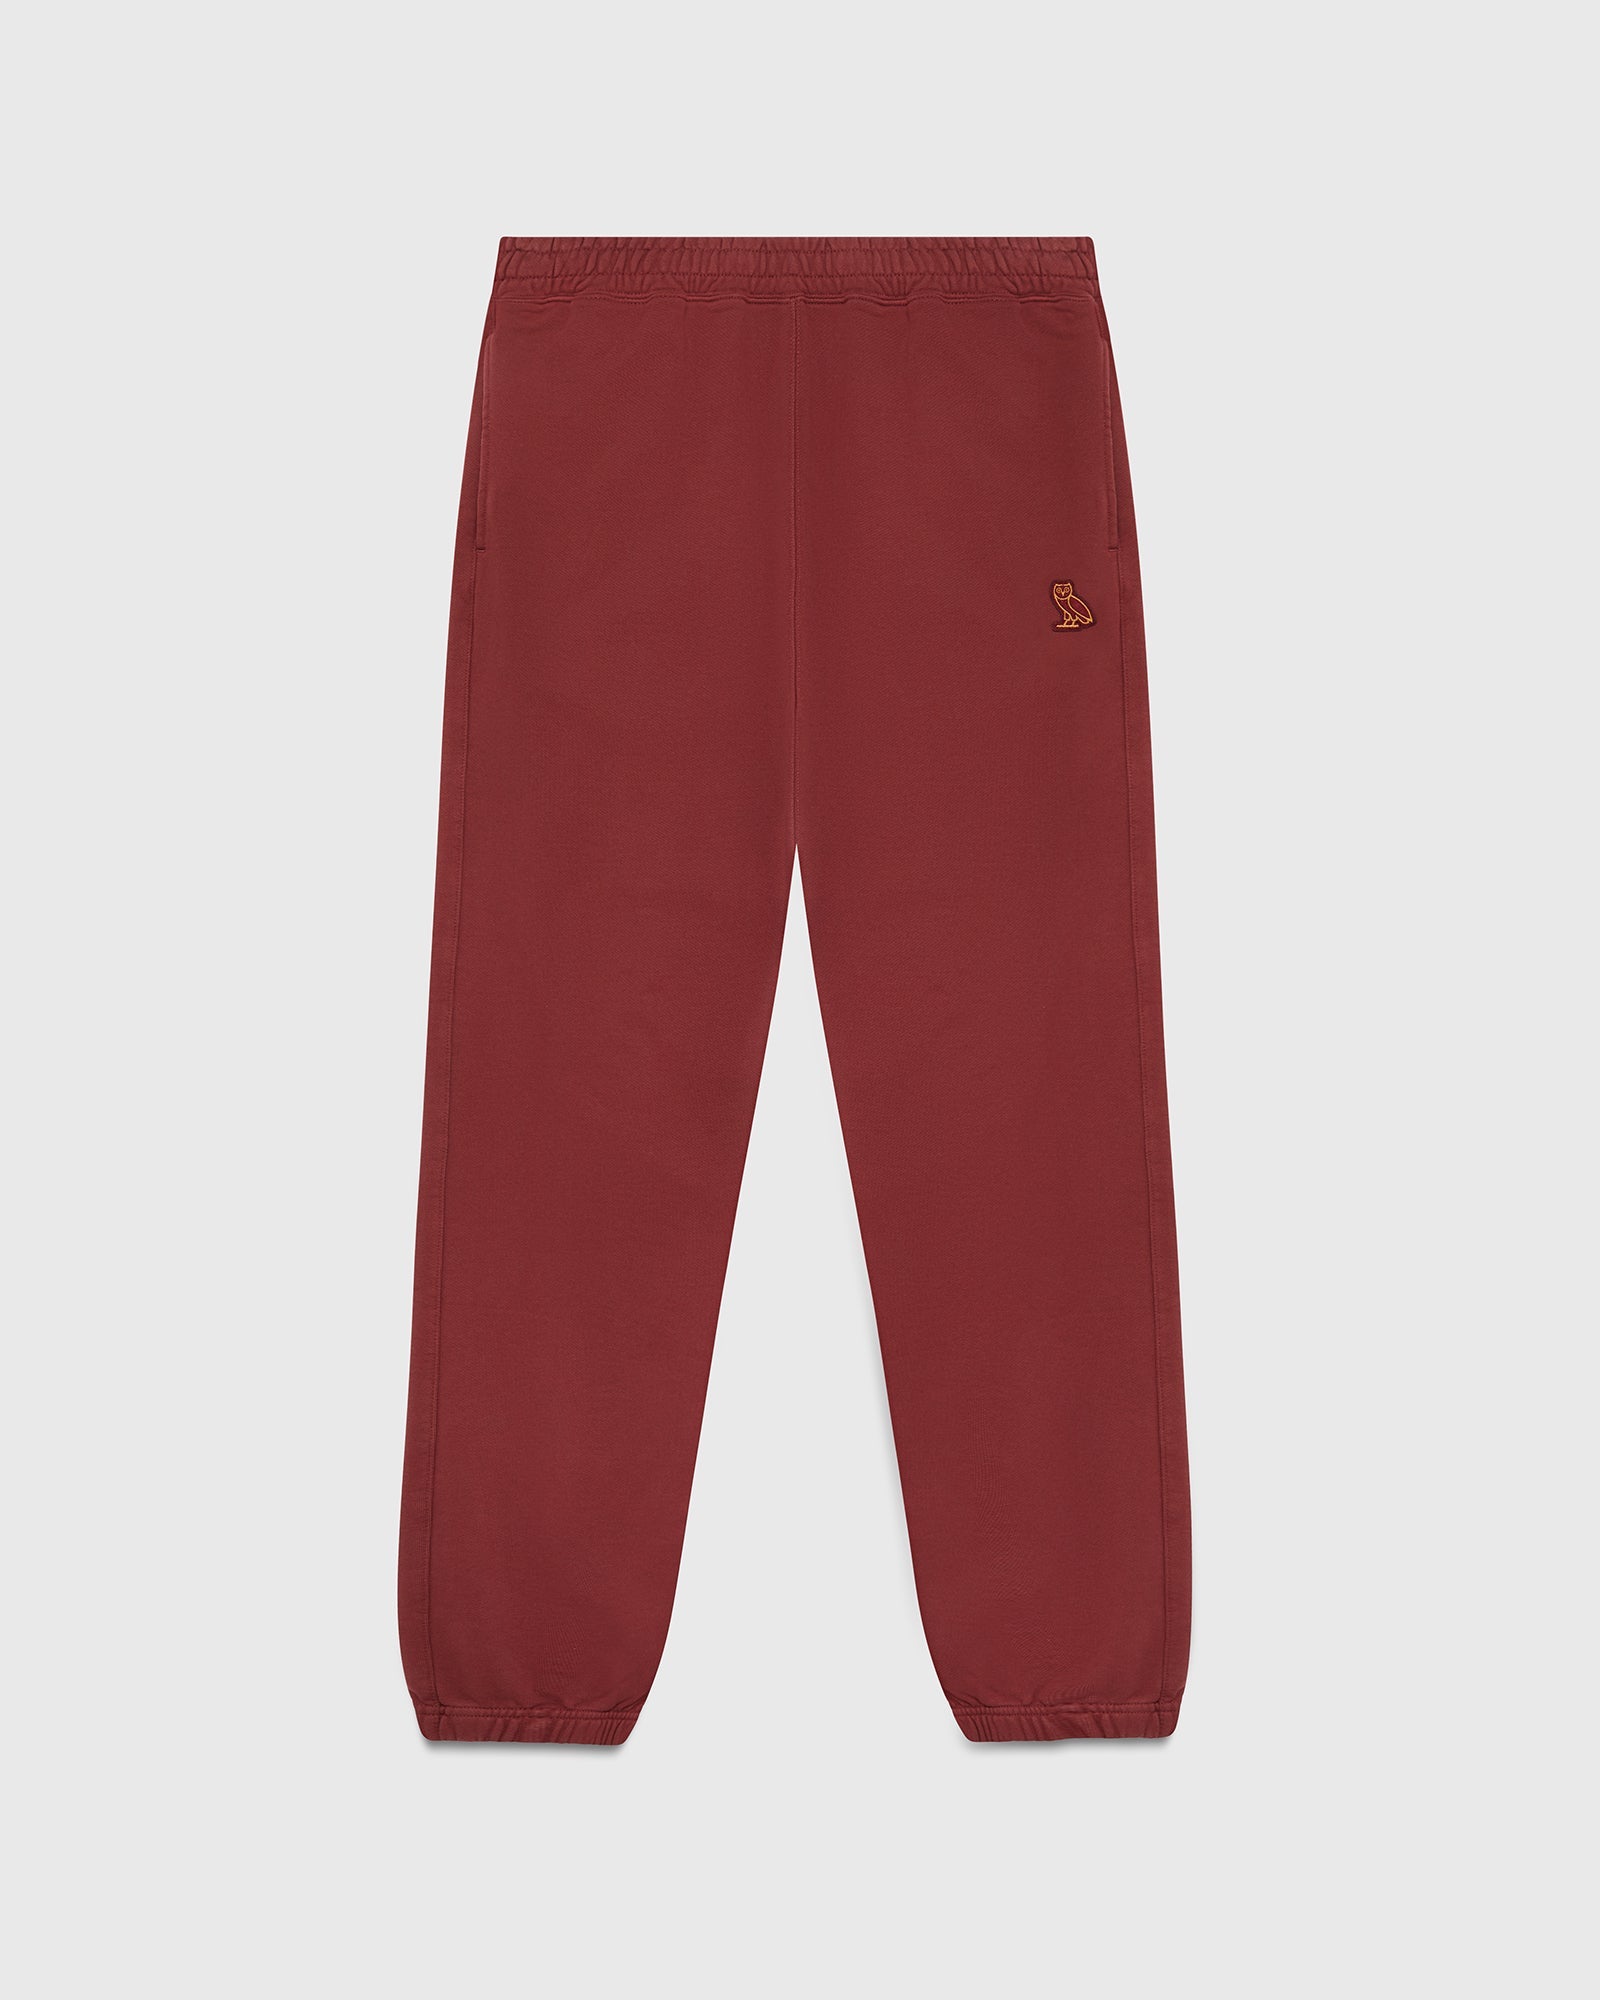 Classic Relaxed Fit Sweatpant - Burgundy IMAGE #1